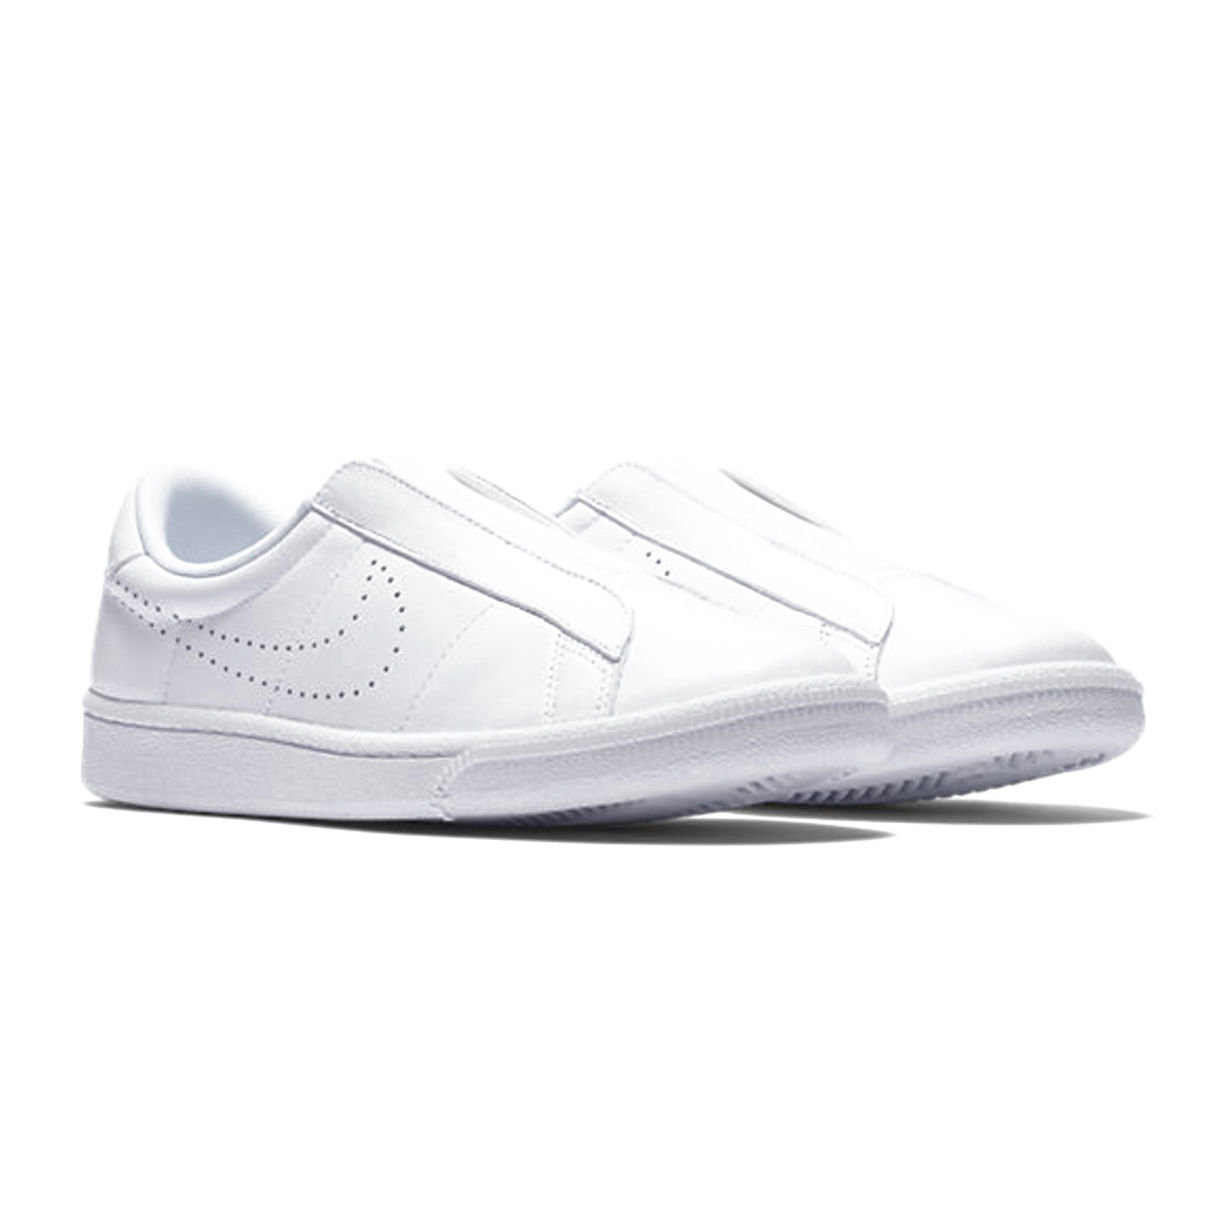 Wimbledon-worthy: 5 all-white sneakers to up your shoe game | Lifestyle ...